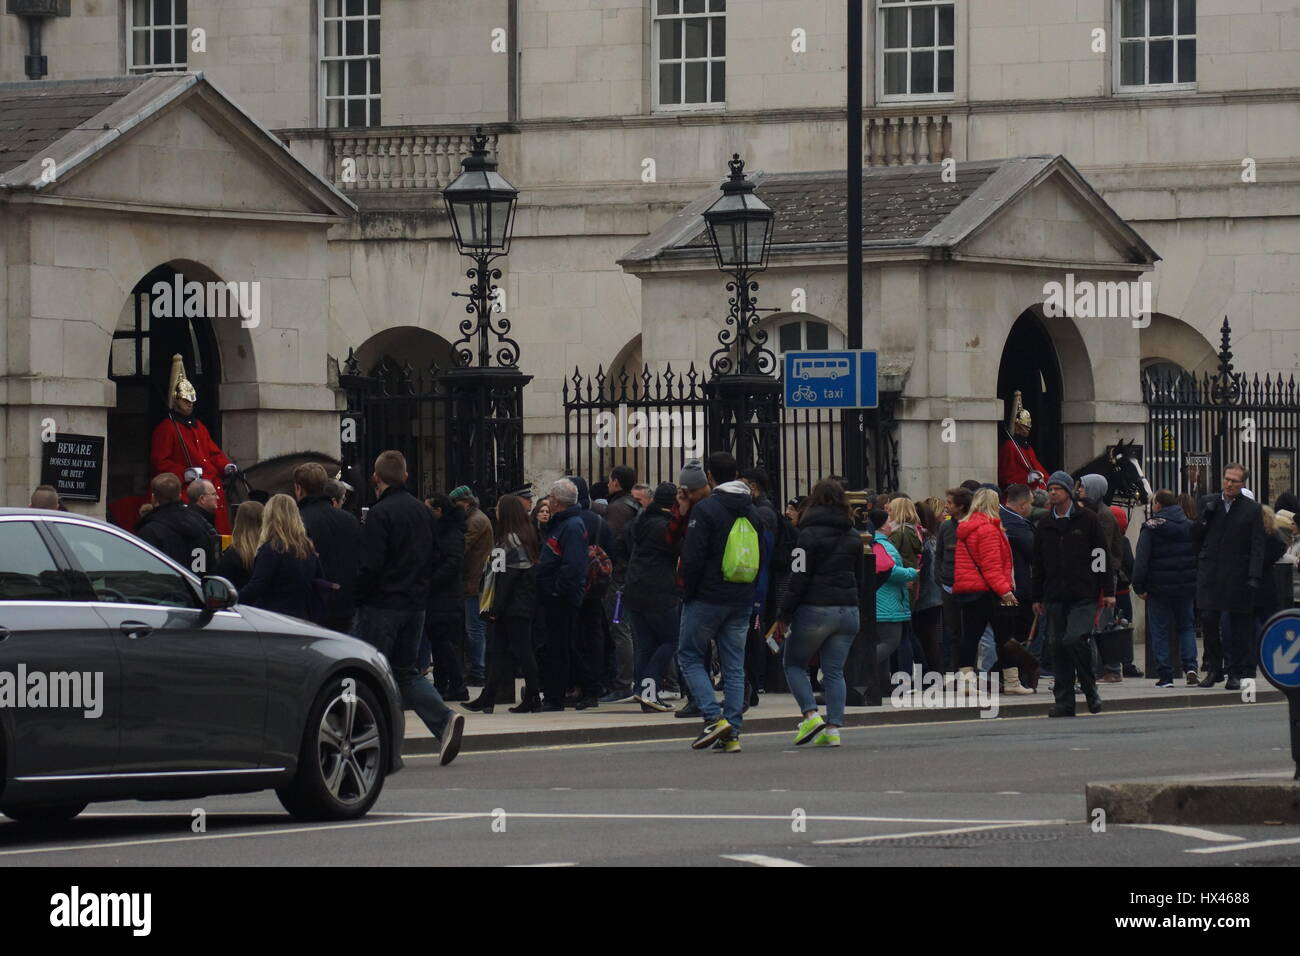 London, UK. 23rd Mar, 2017. Tourists flock to see the Household Cavalry at Horse Guards in the wake of the murder of PC Keith Palmer by Khalid Massood, also known as Adrian Elms, also known as Adrian Russell Ajao on Wednesday 21 March 2017. Members of the public pay floral tribute whilst television journalists make their reports and police officers survey the scene. Credit: Peter Hogan/Alamy Live News Stock Photo